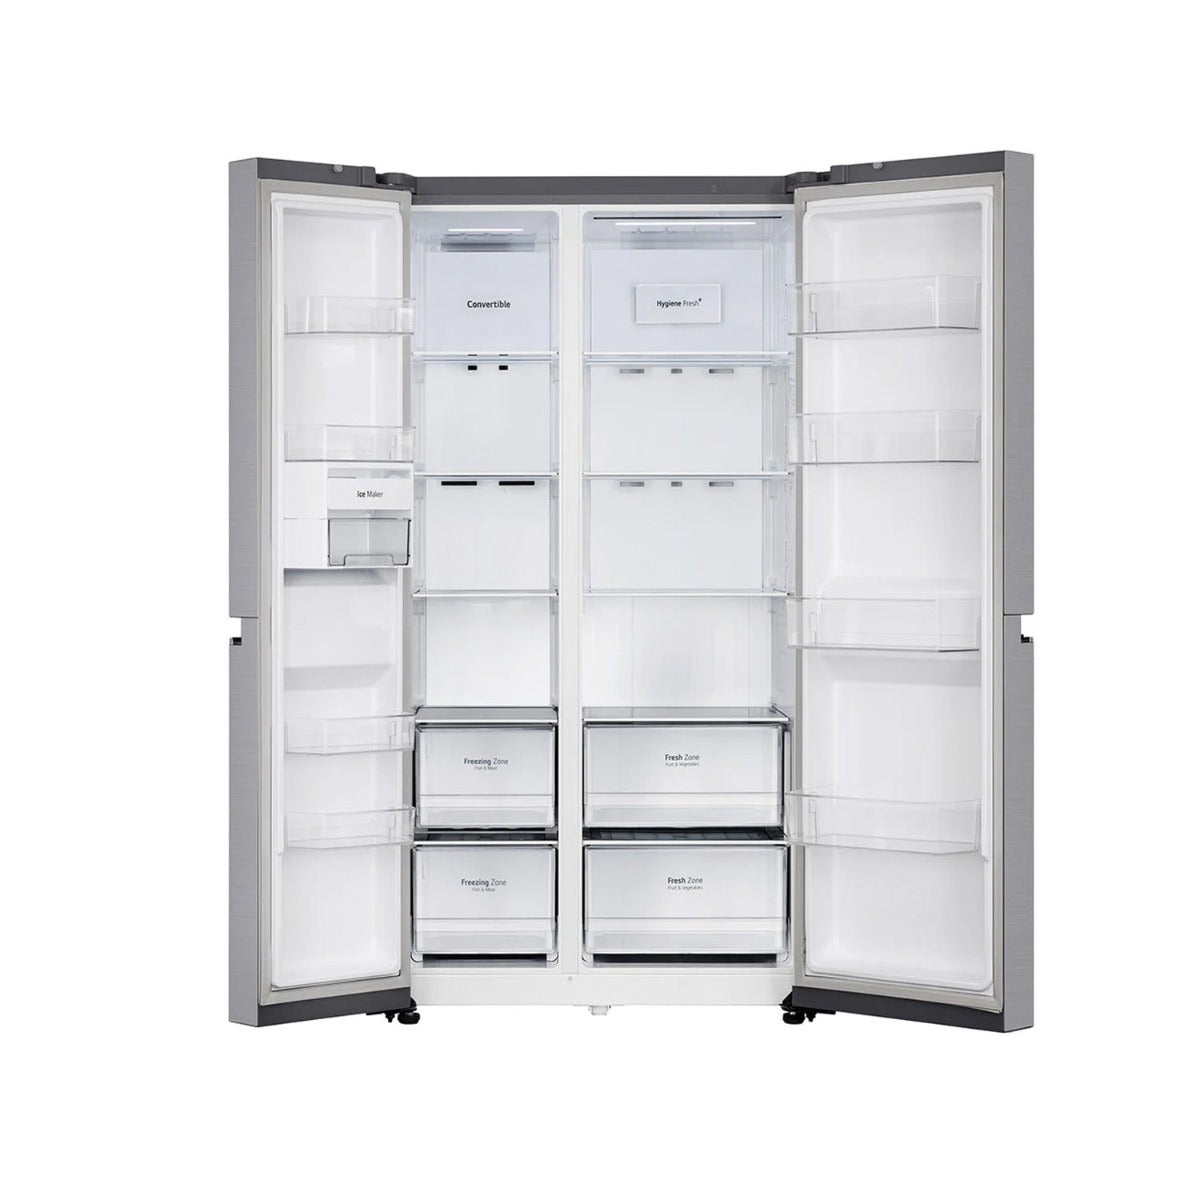 Best Side-by-Side Refrigerator: LG 650L - Convertible, Shiny Steel